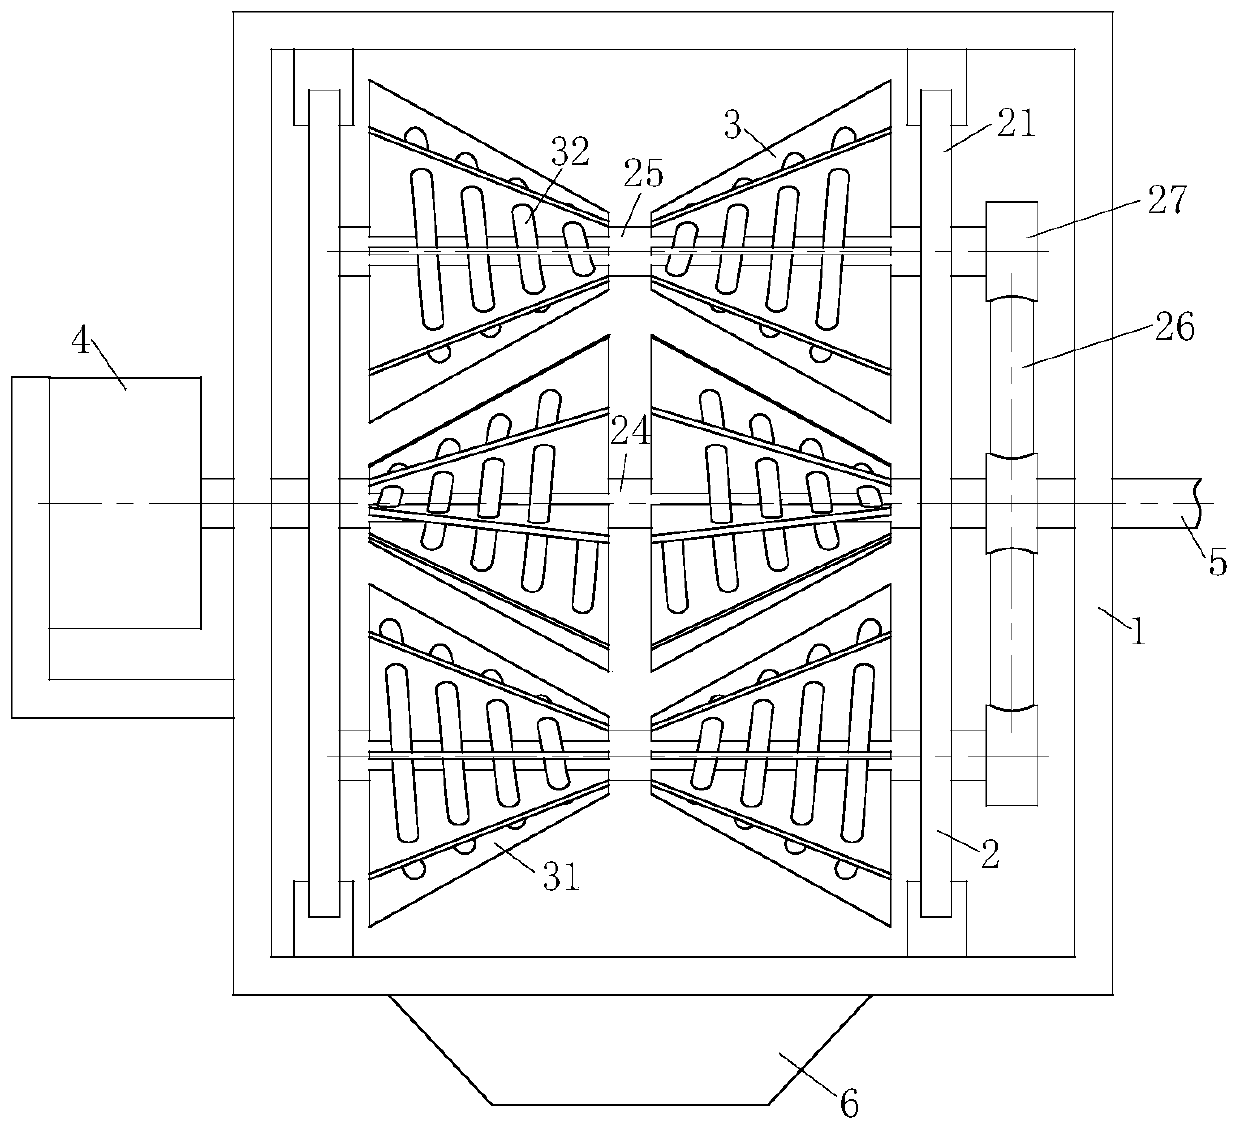 A method for improving the heat conversion efficiency of an air conditioner evaporator